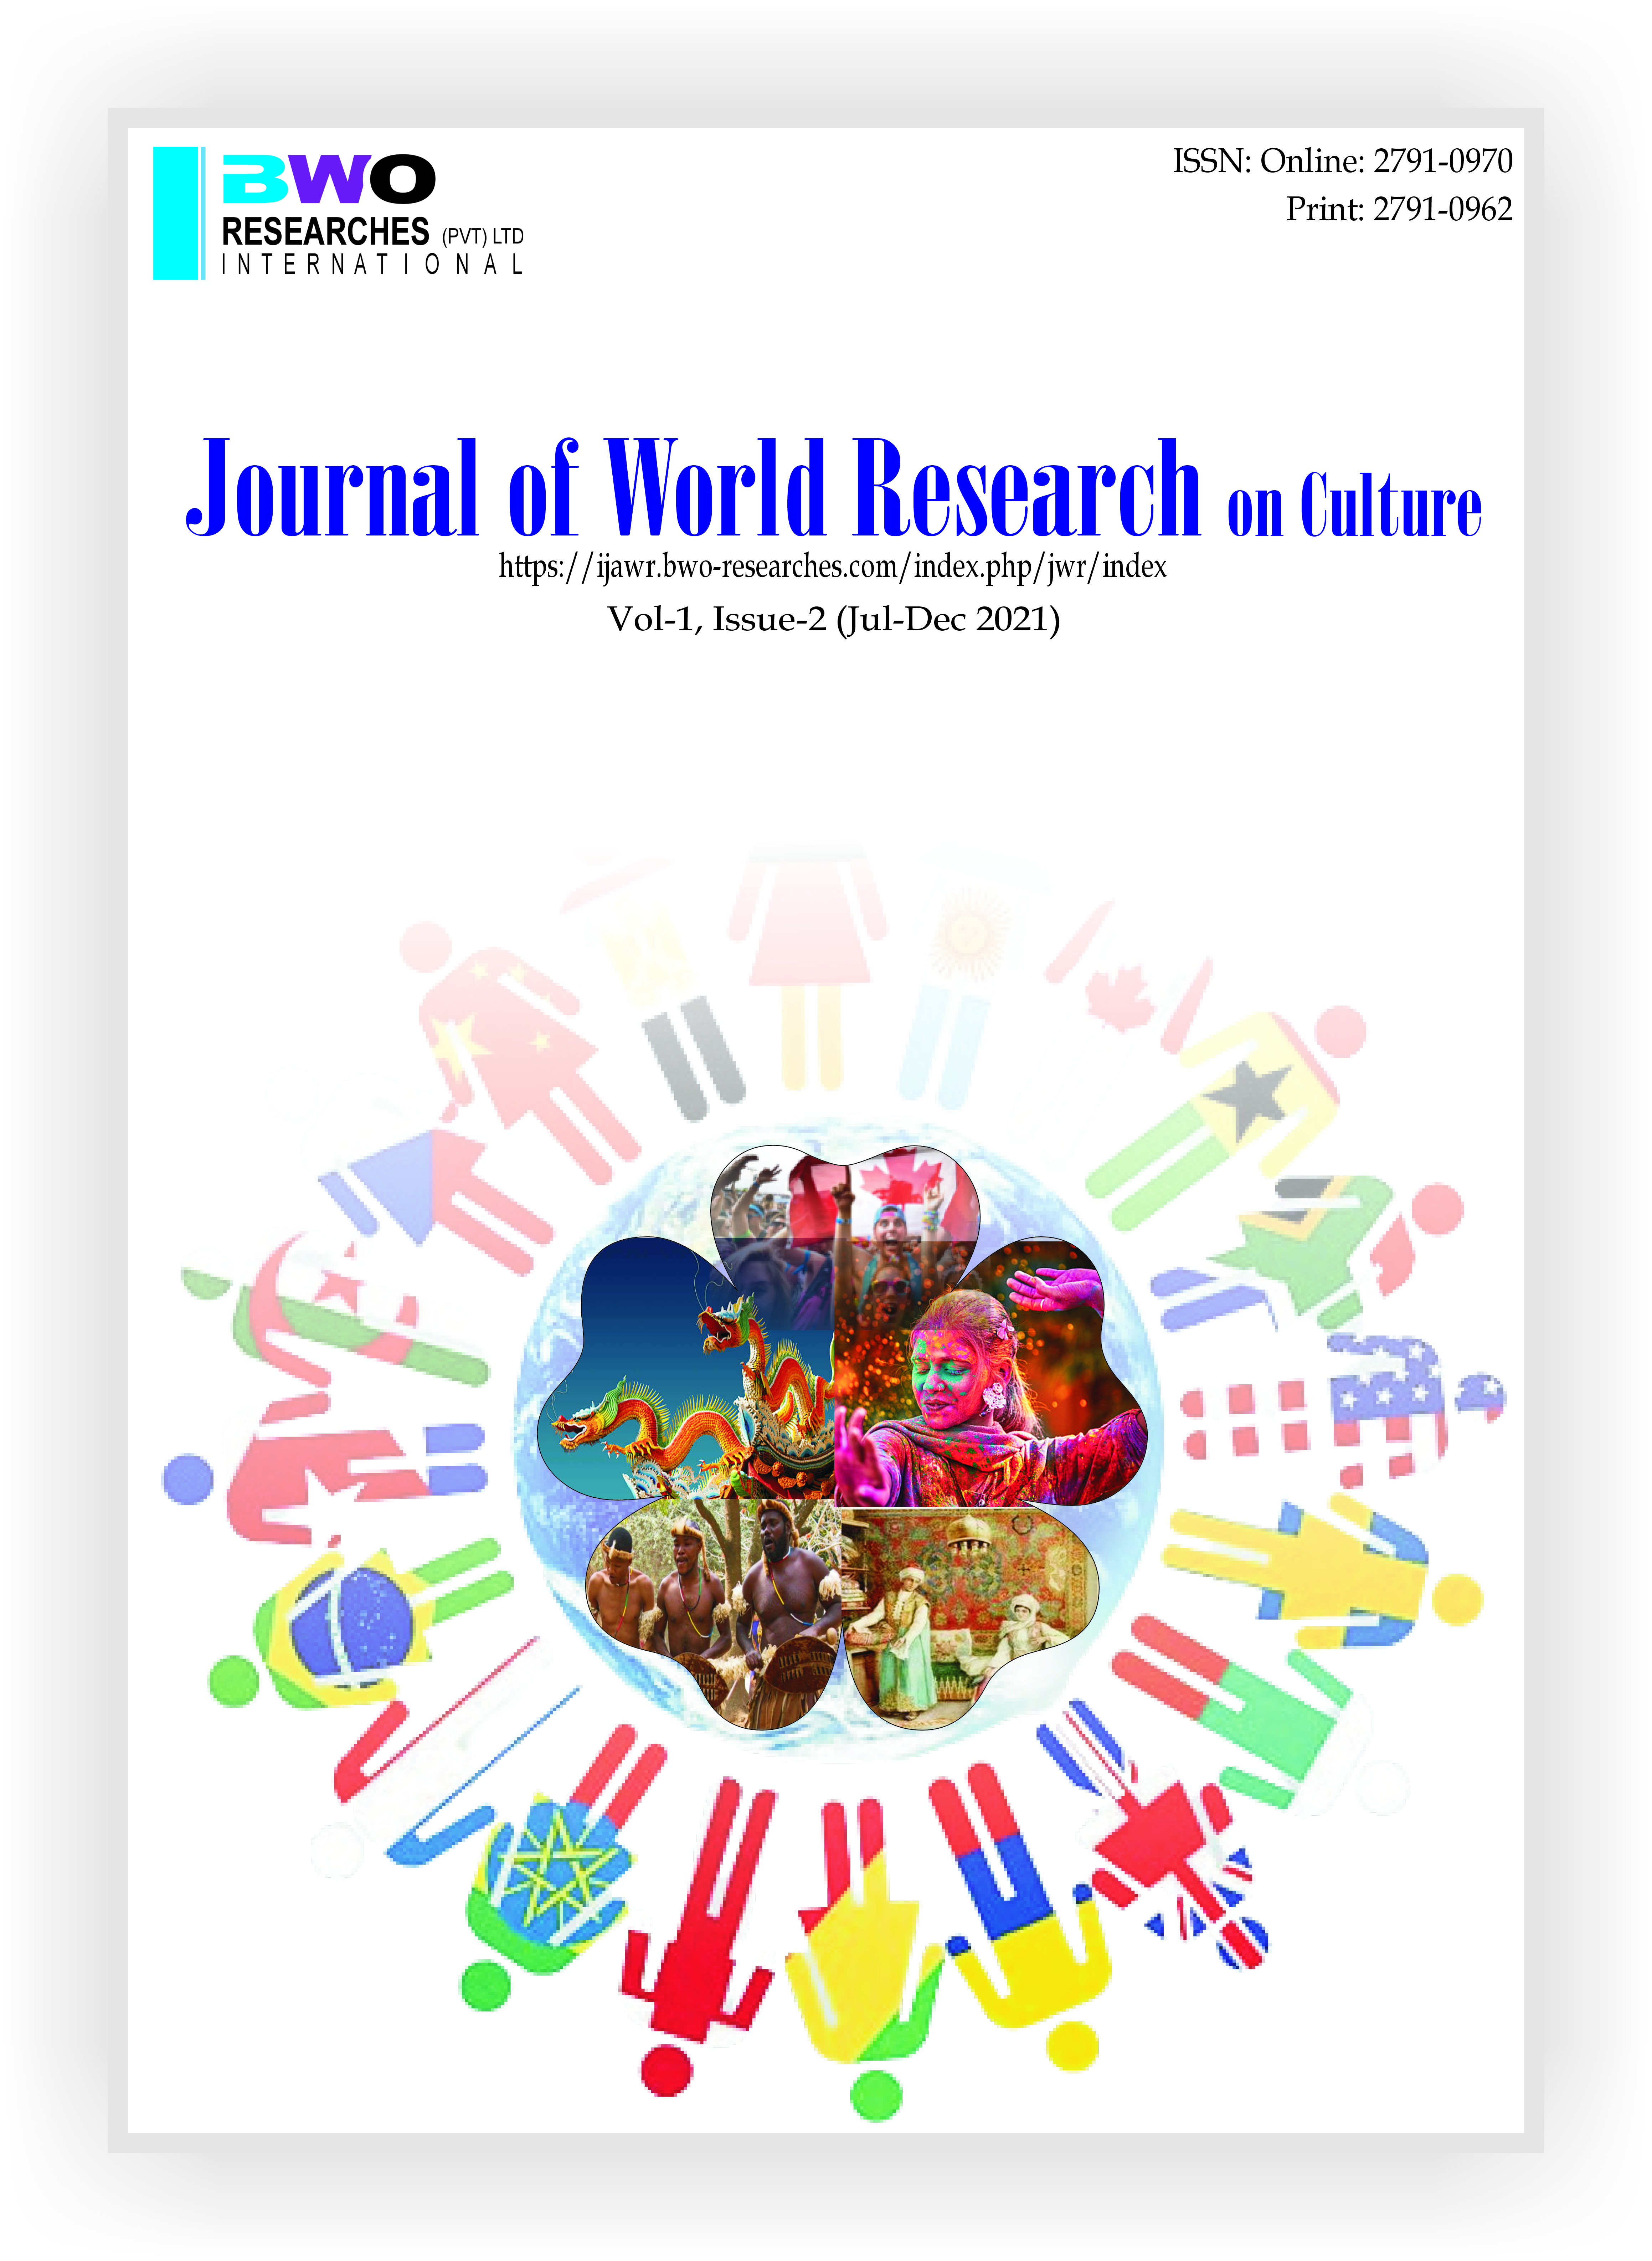 					View Vol. 1 No. 1 (2021): The Journal of World Research on Culture
				